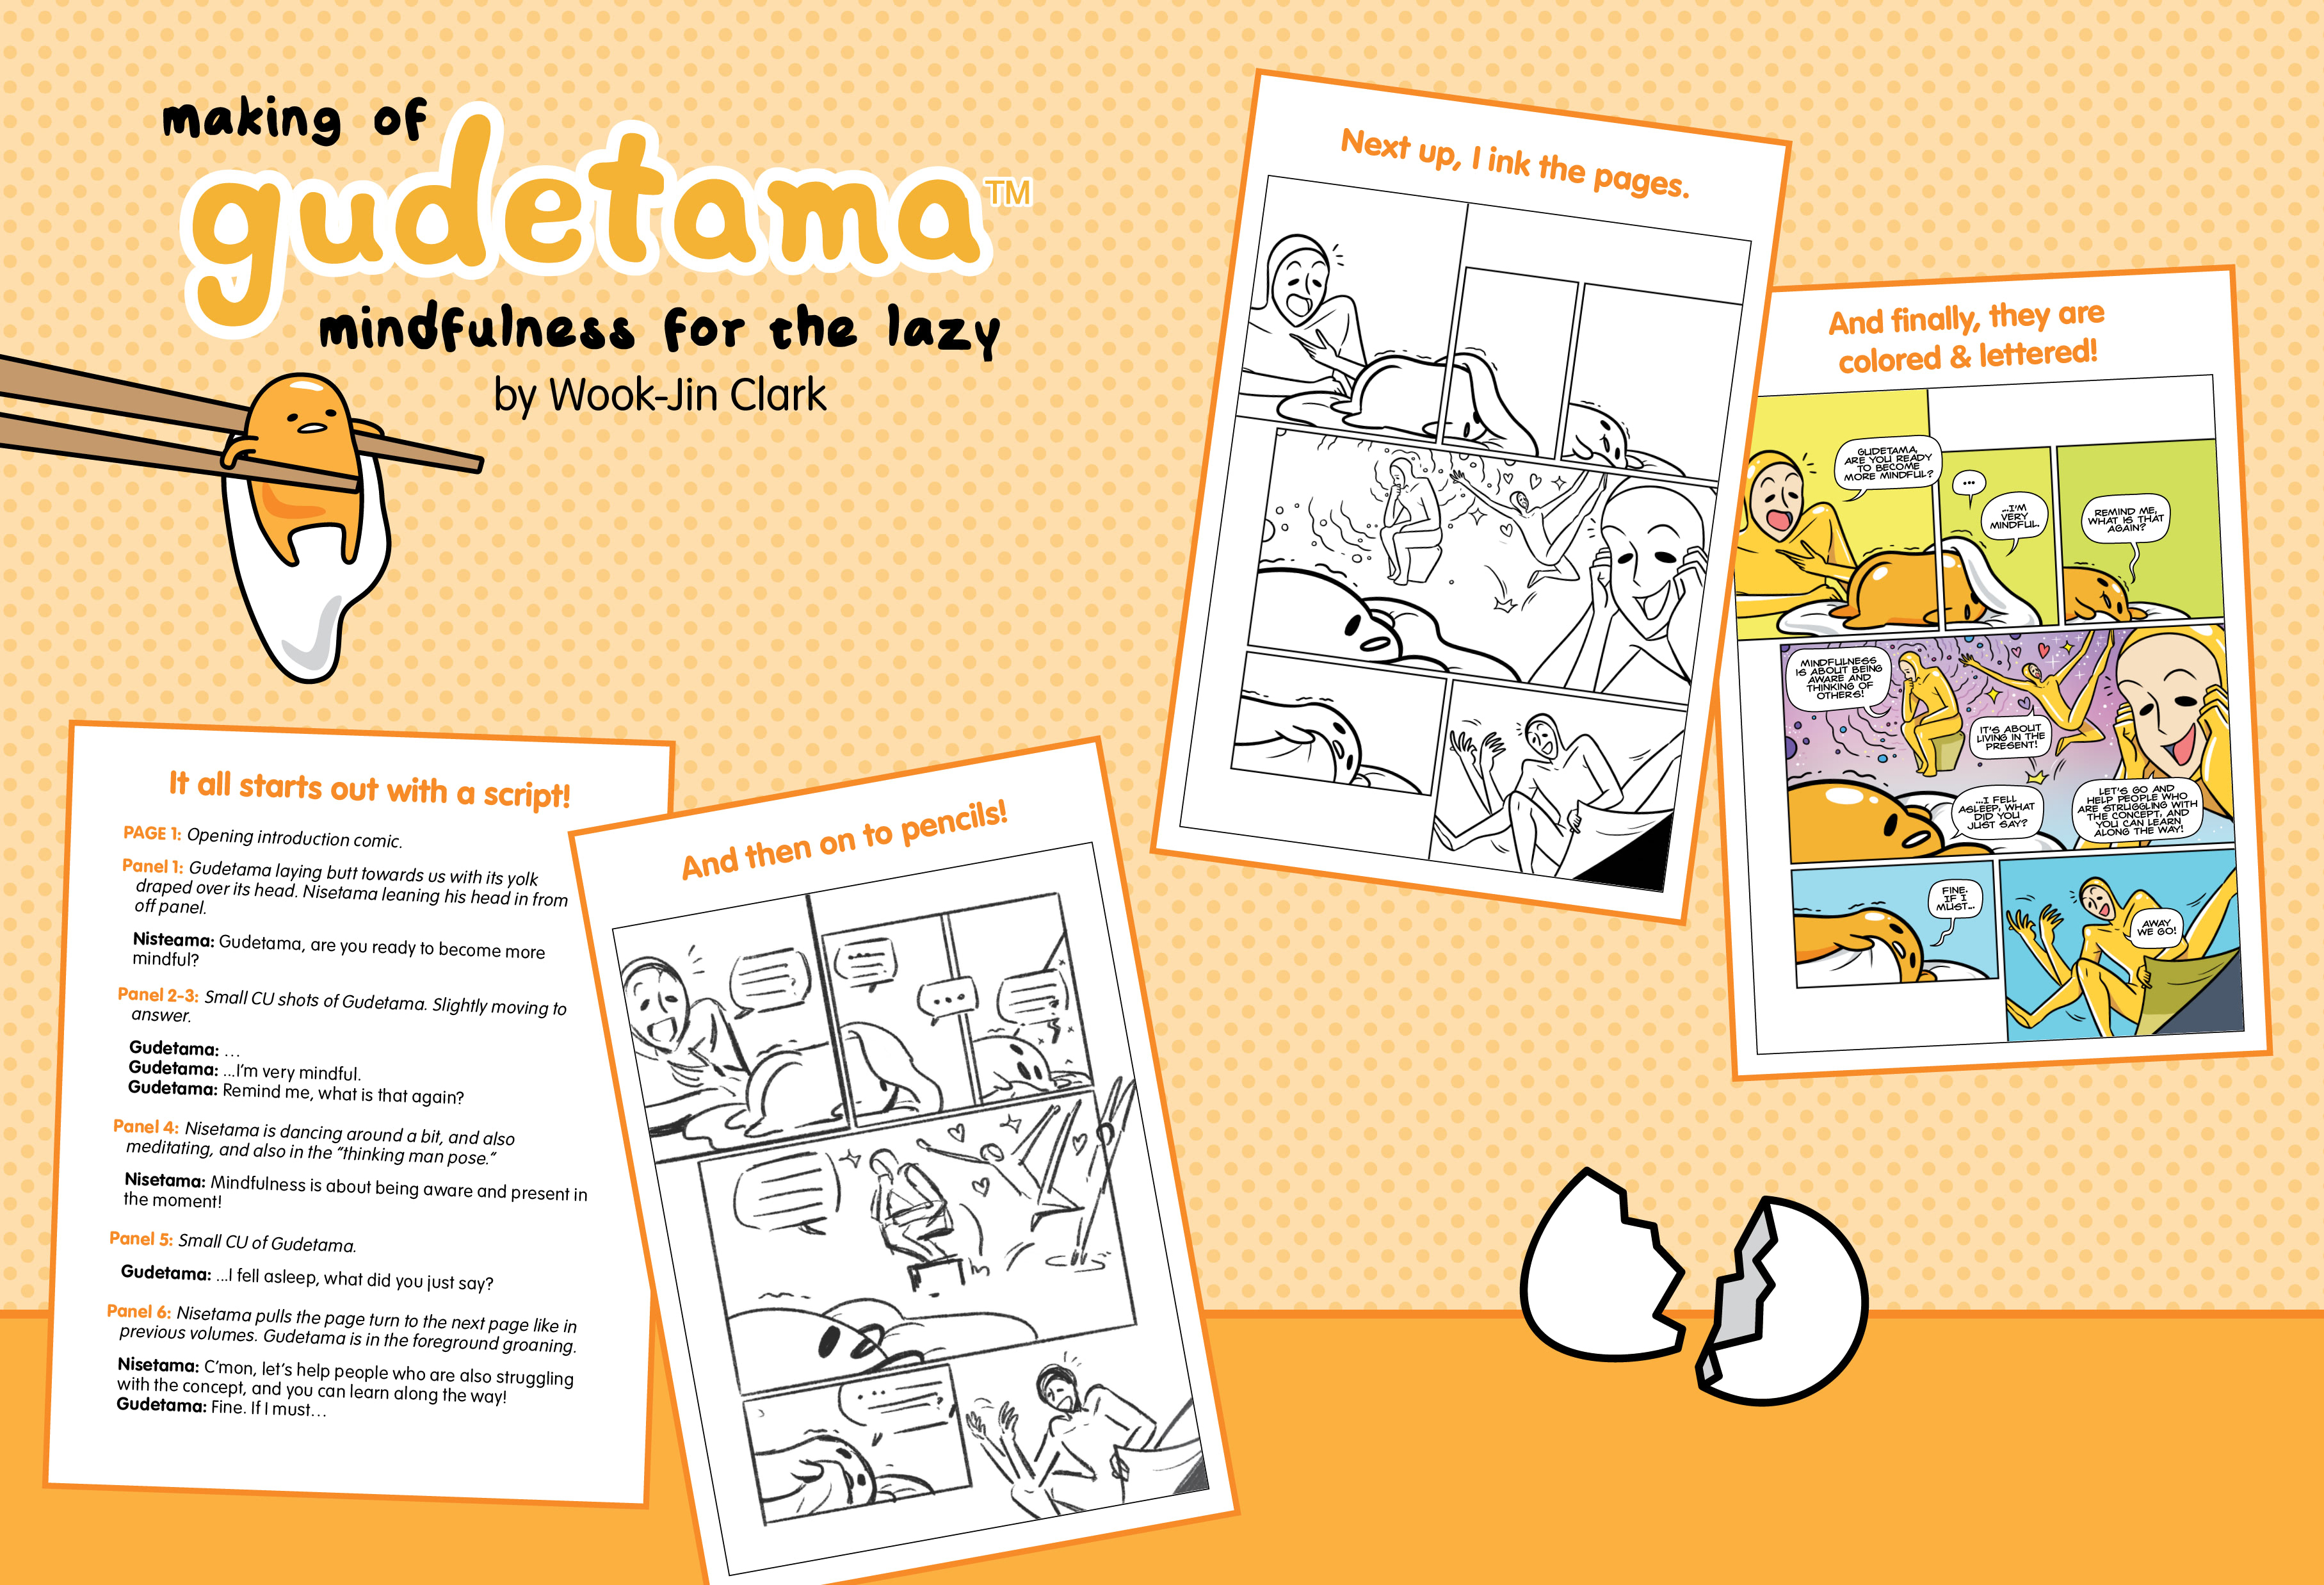 Read online Gudetama comic -  Issue # Mindfulness for the Lazy - 44